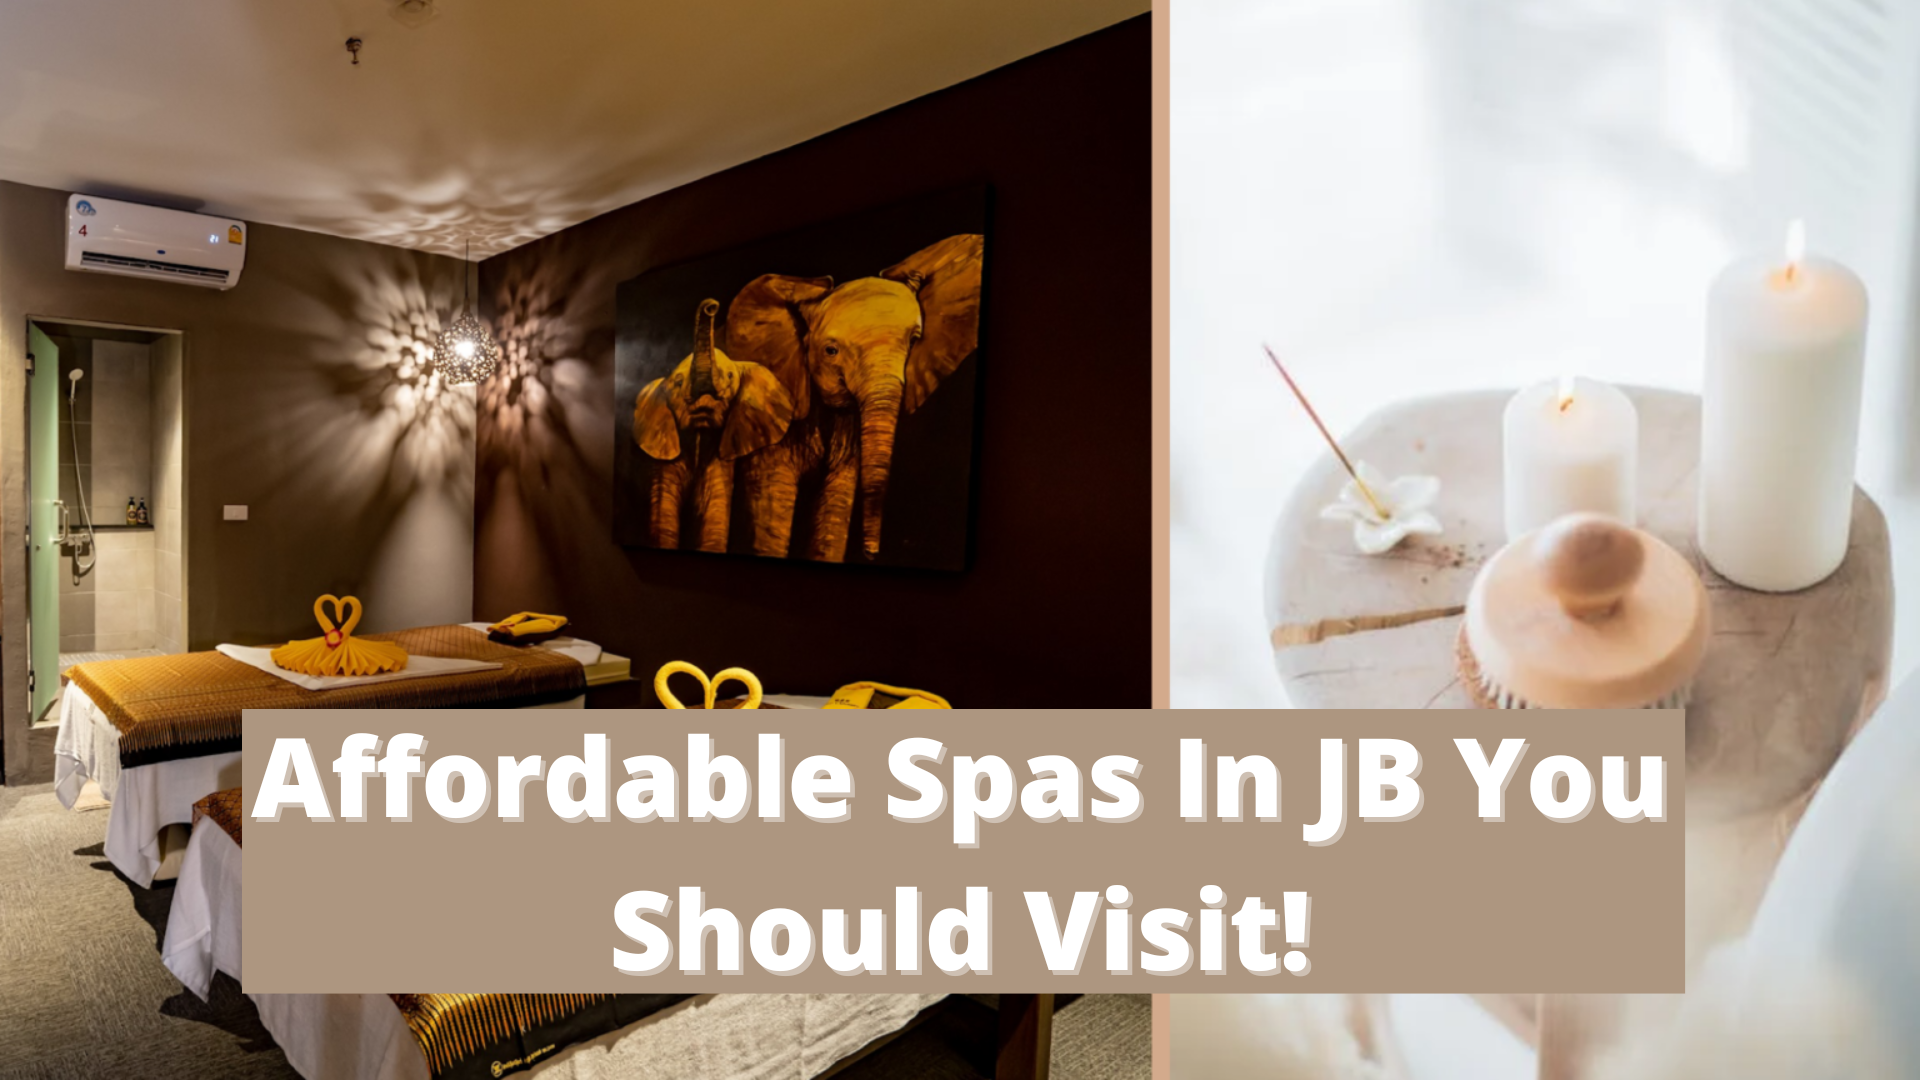 12 Affordable Spa In JB Every Singaporean Should Visit